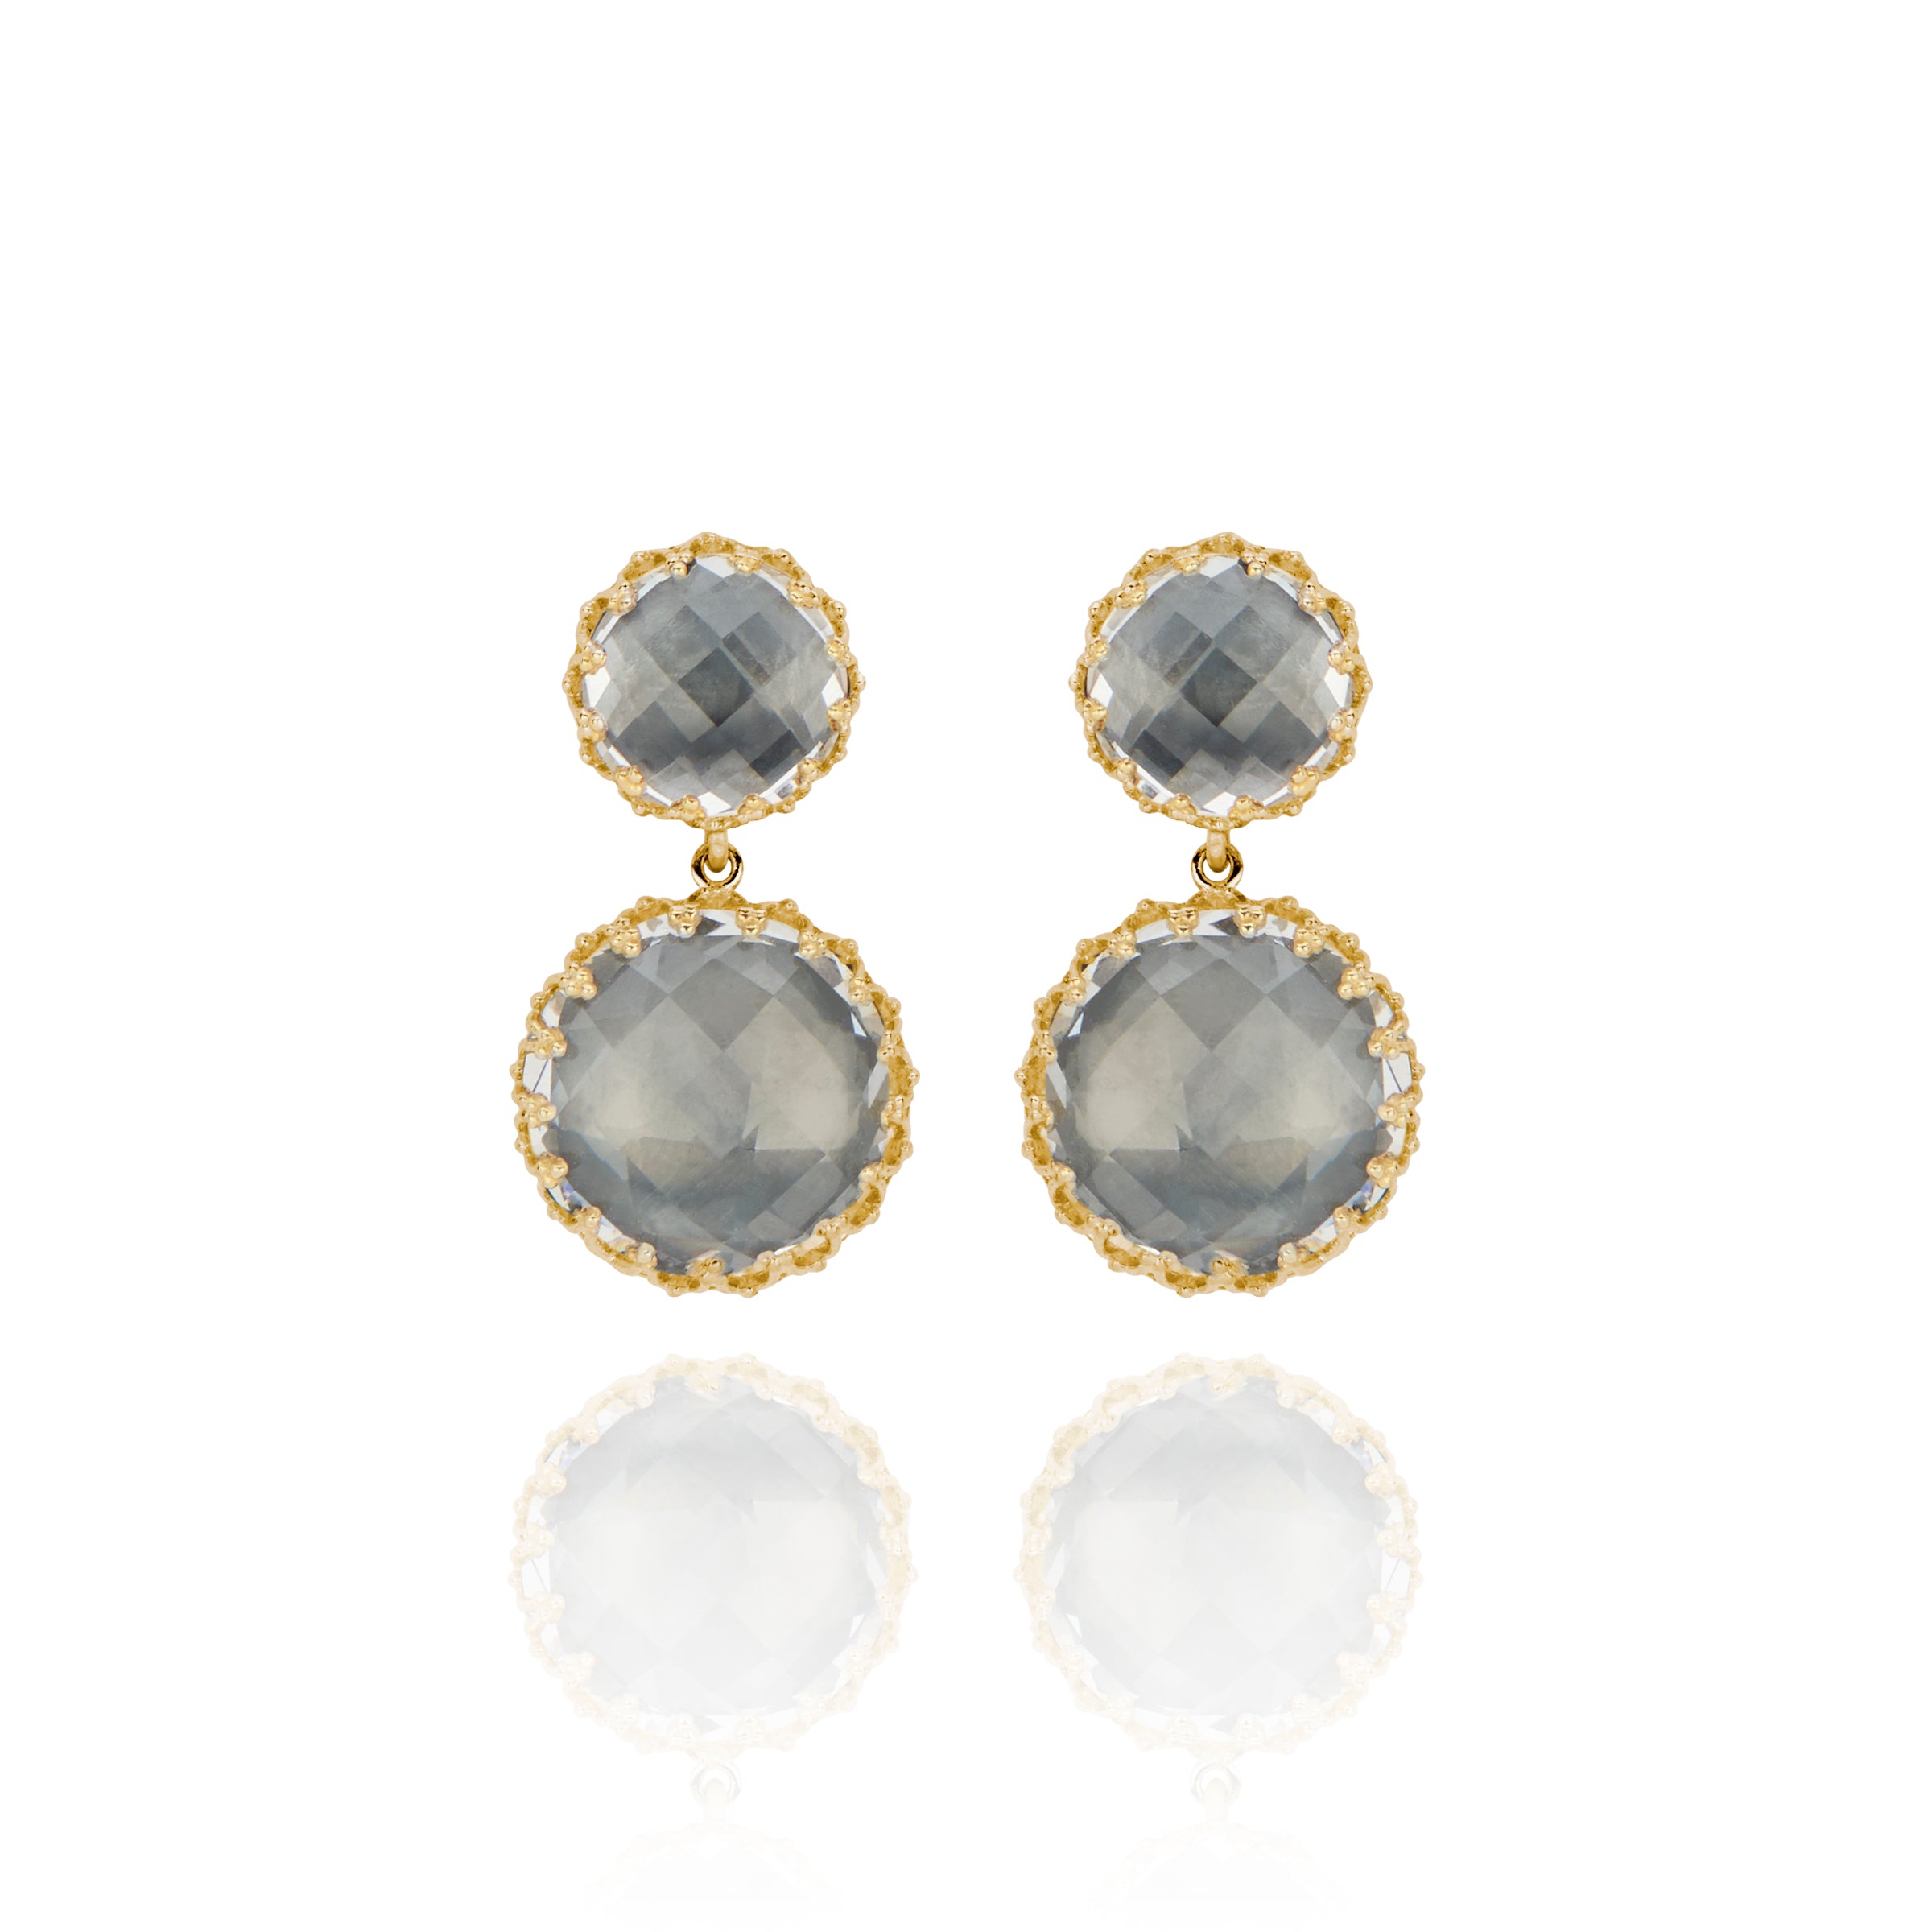 Olivia Small Day Night Earrings (Black Rhodium or Yellow Gold Wash)